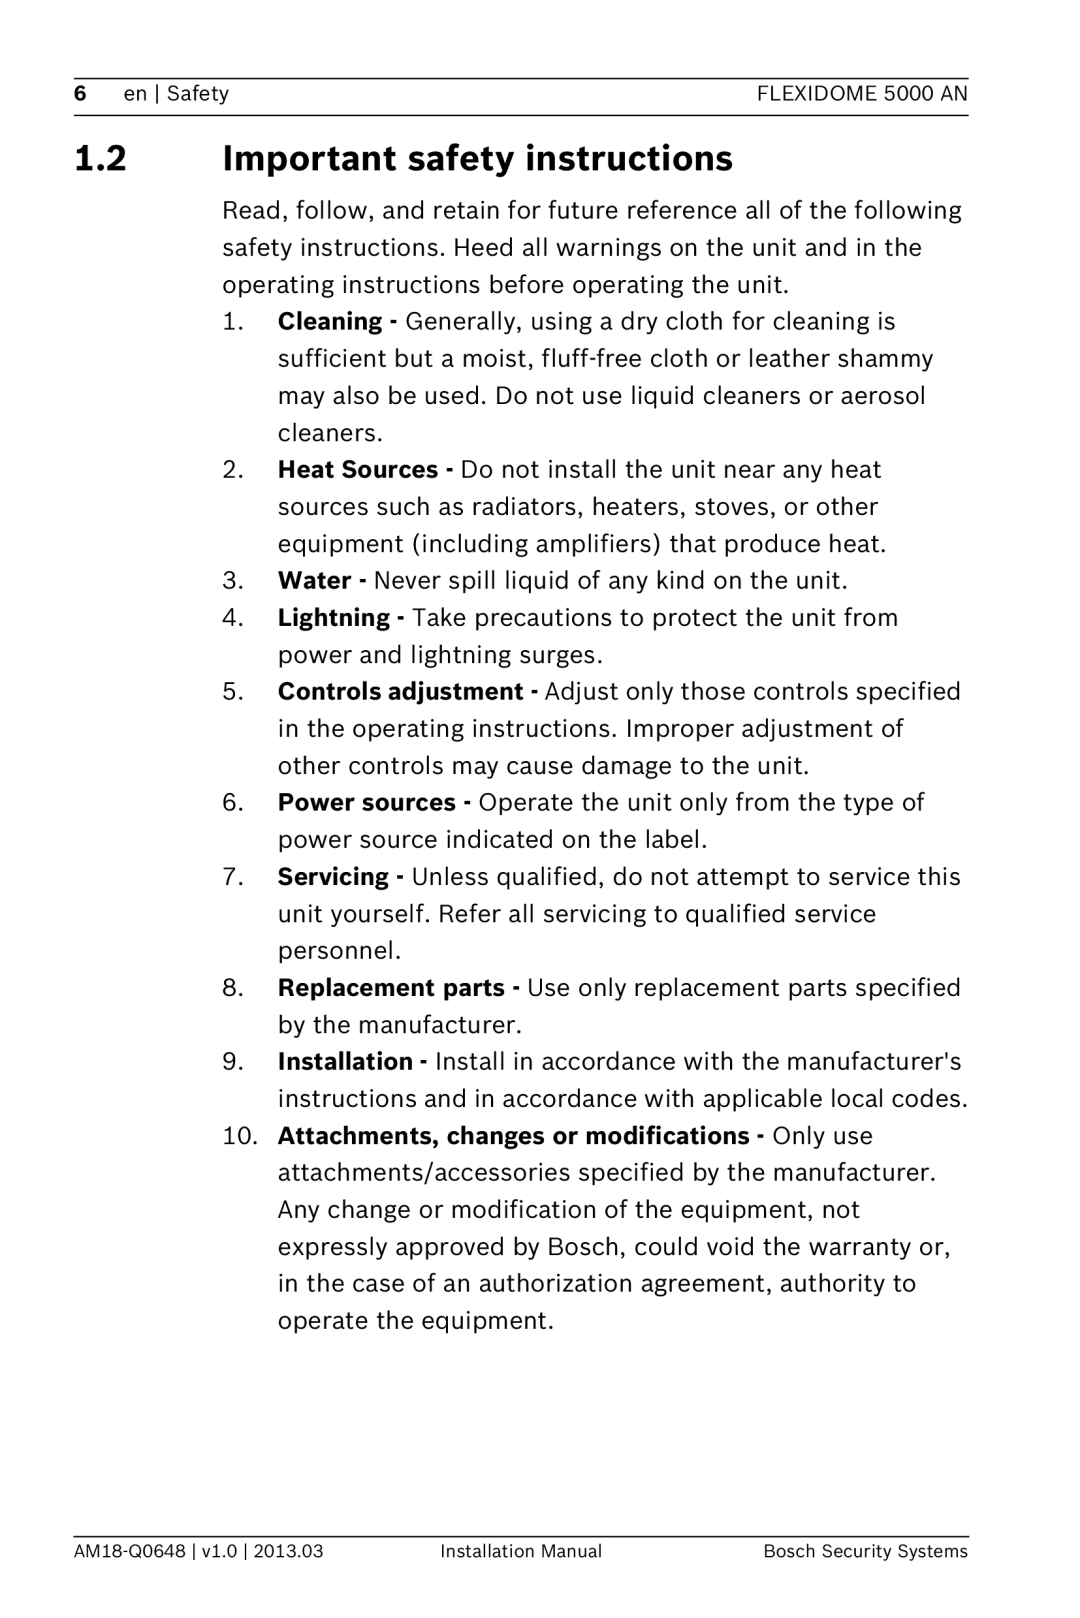 Bosch Appliances installation manual 1.2Important safety instructions, en Safety, FLEXIDOME 5000 AN 